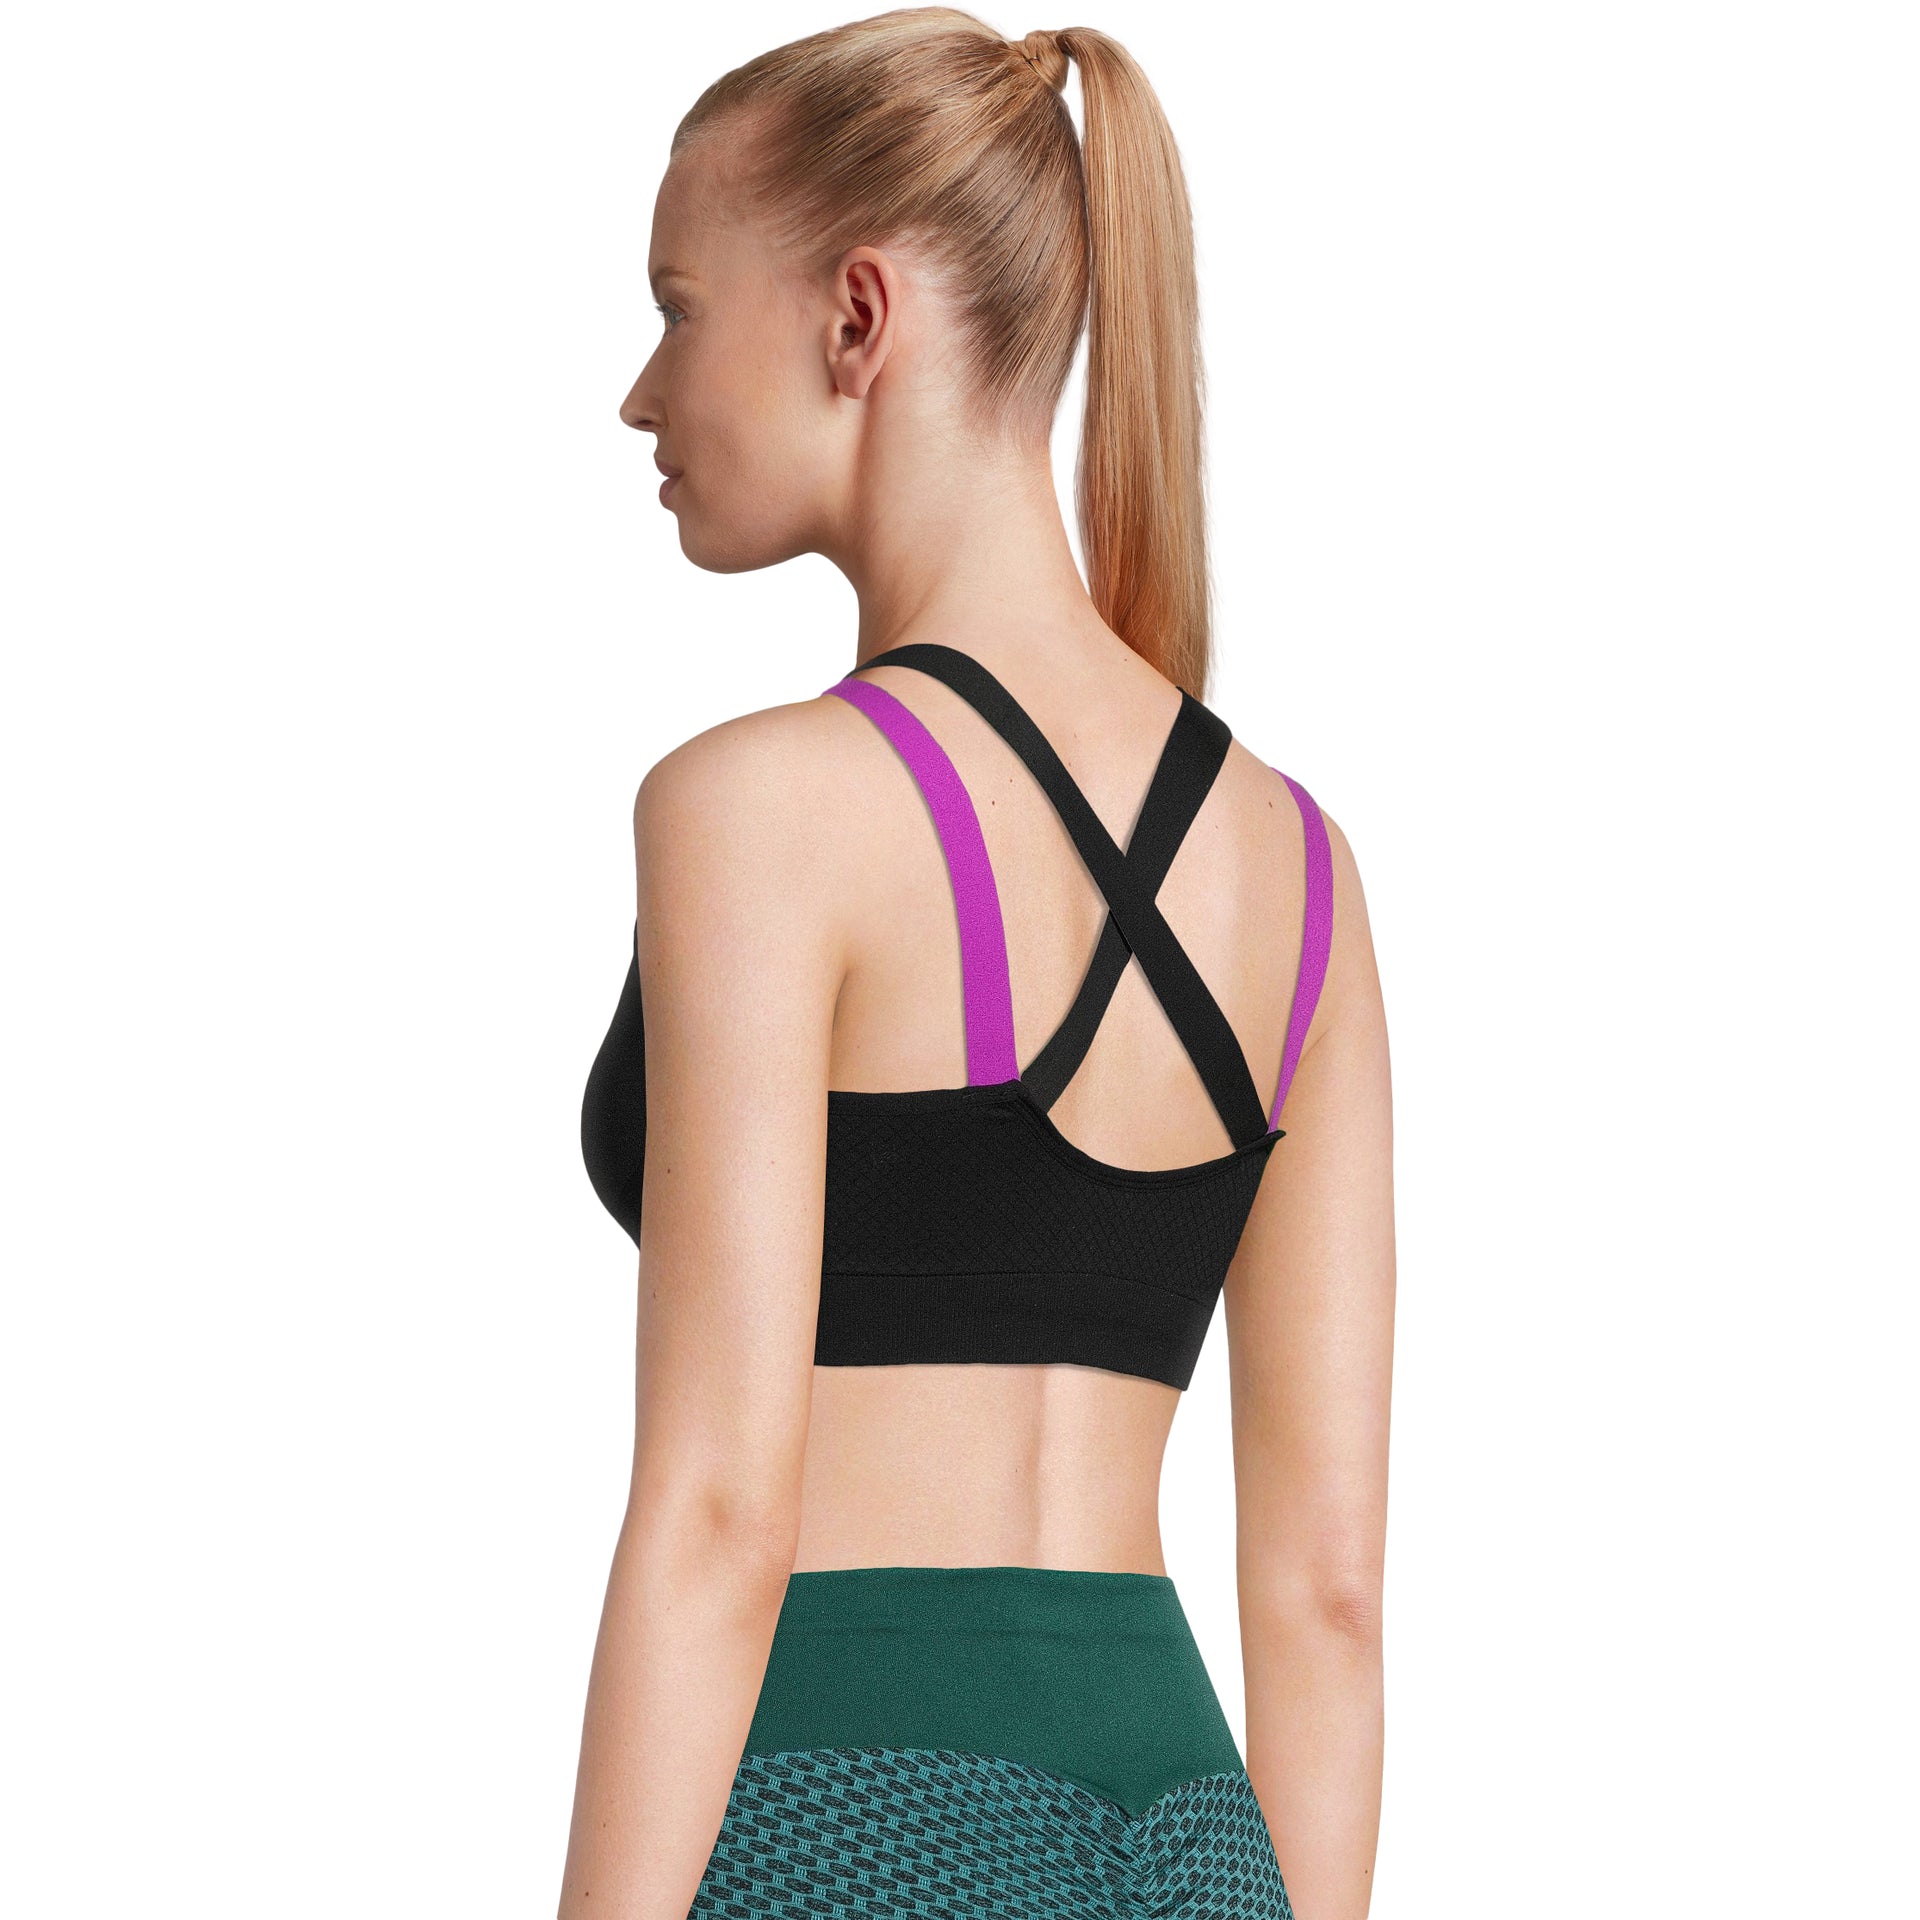 dianhelloya sports bras for women Adjustable Straps Pads Wire Free